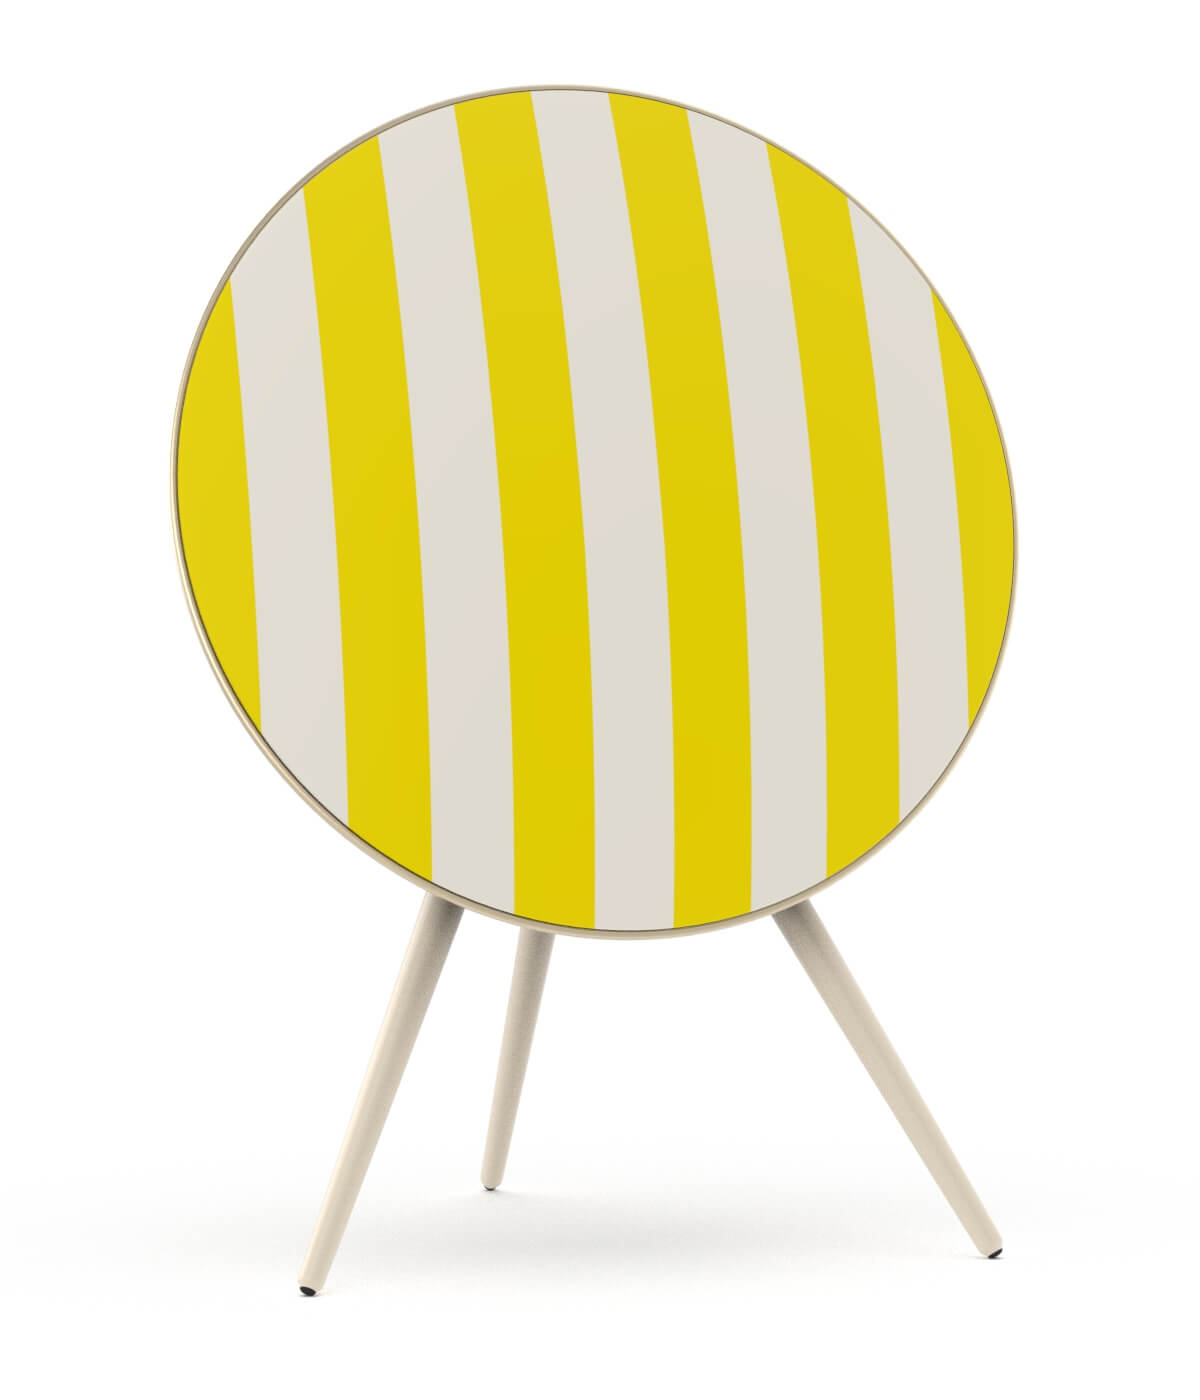 Skiniplay cover Citron for Bang & Olufsen Beoplay A9 and Beosound A9 speaker